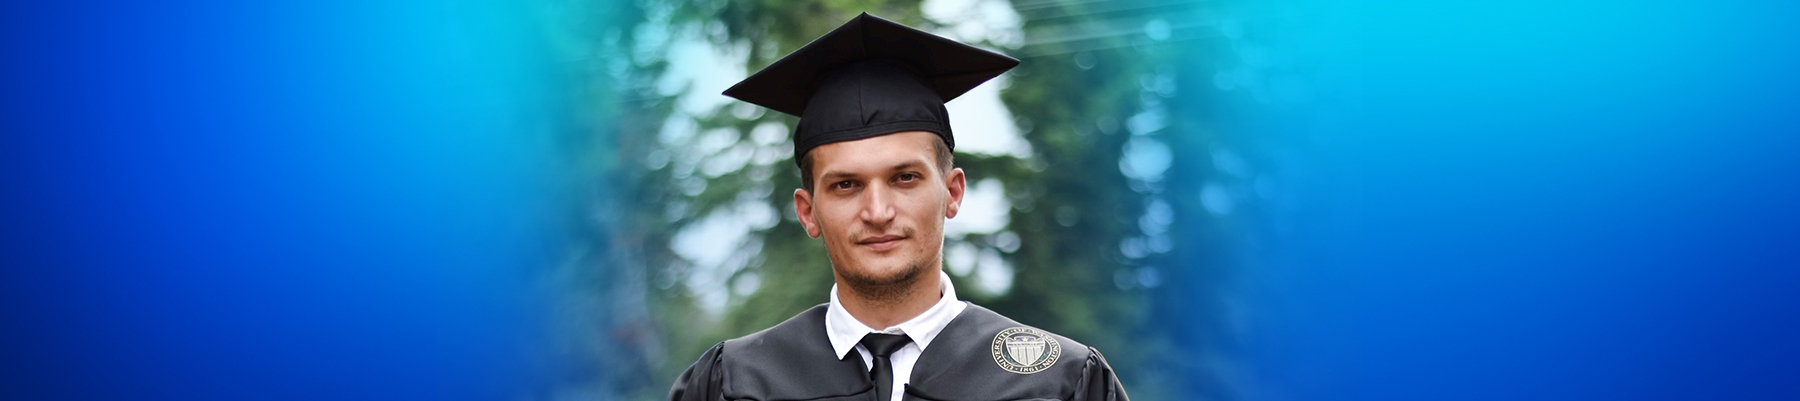 Photo of Vadym wearing his graduate gown, facing the camera and smiling 